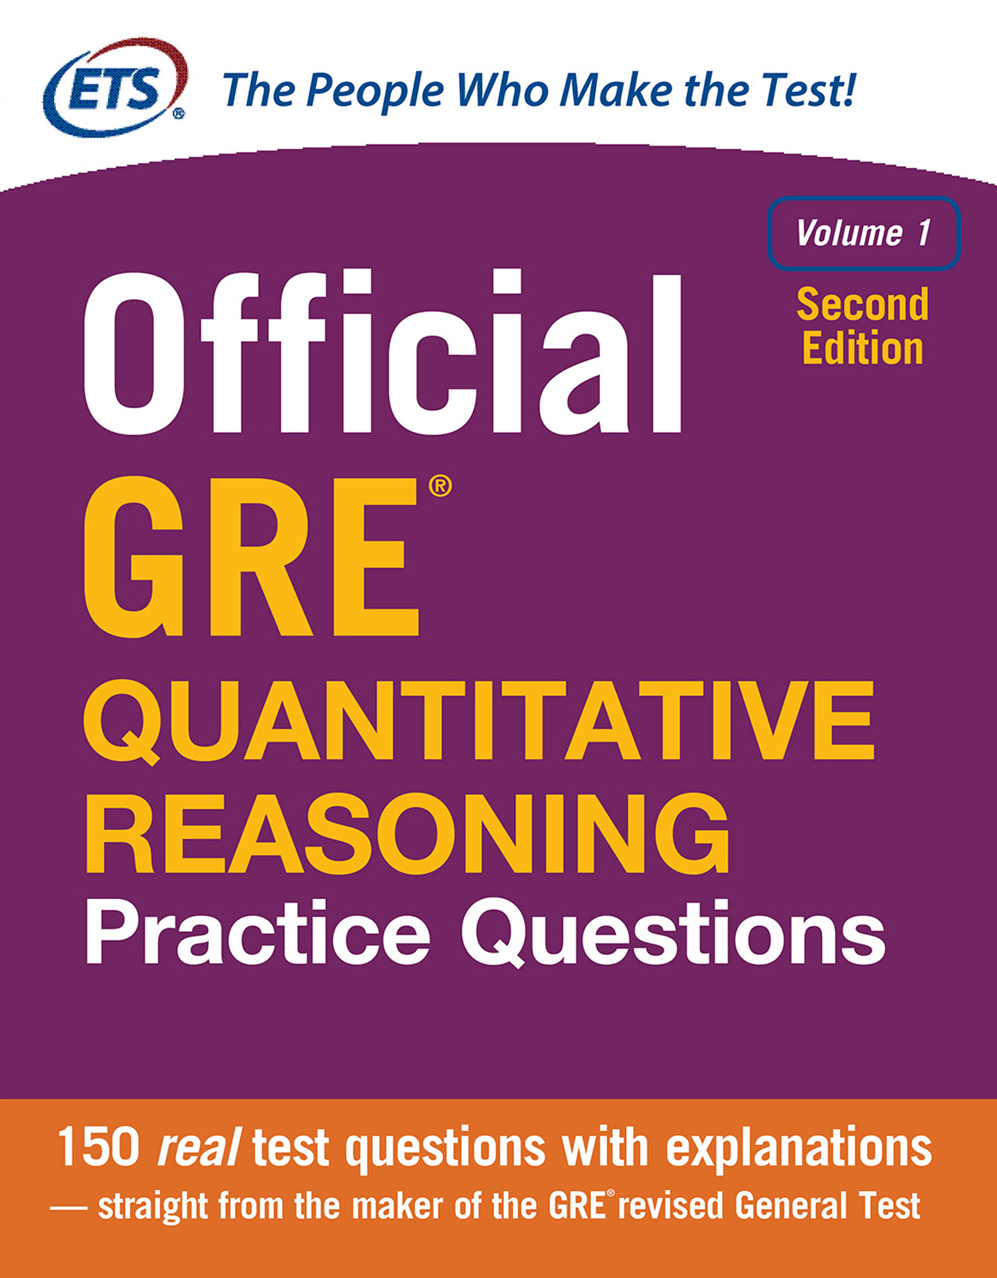 Welcome to Official GRE Quantitative Reasoning Practice Questions Volume 1 - photo 1